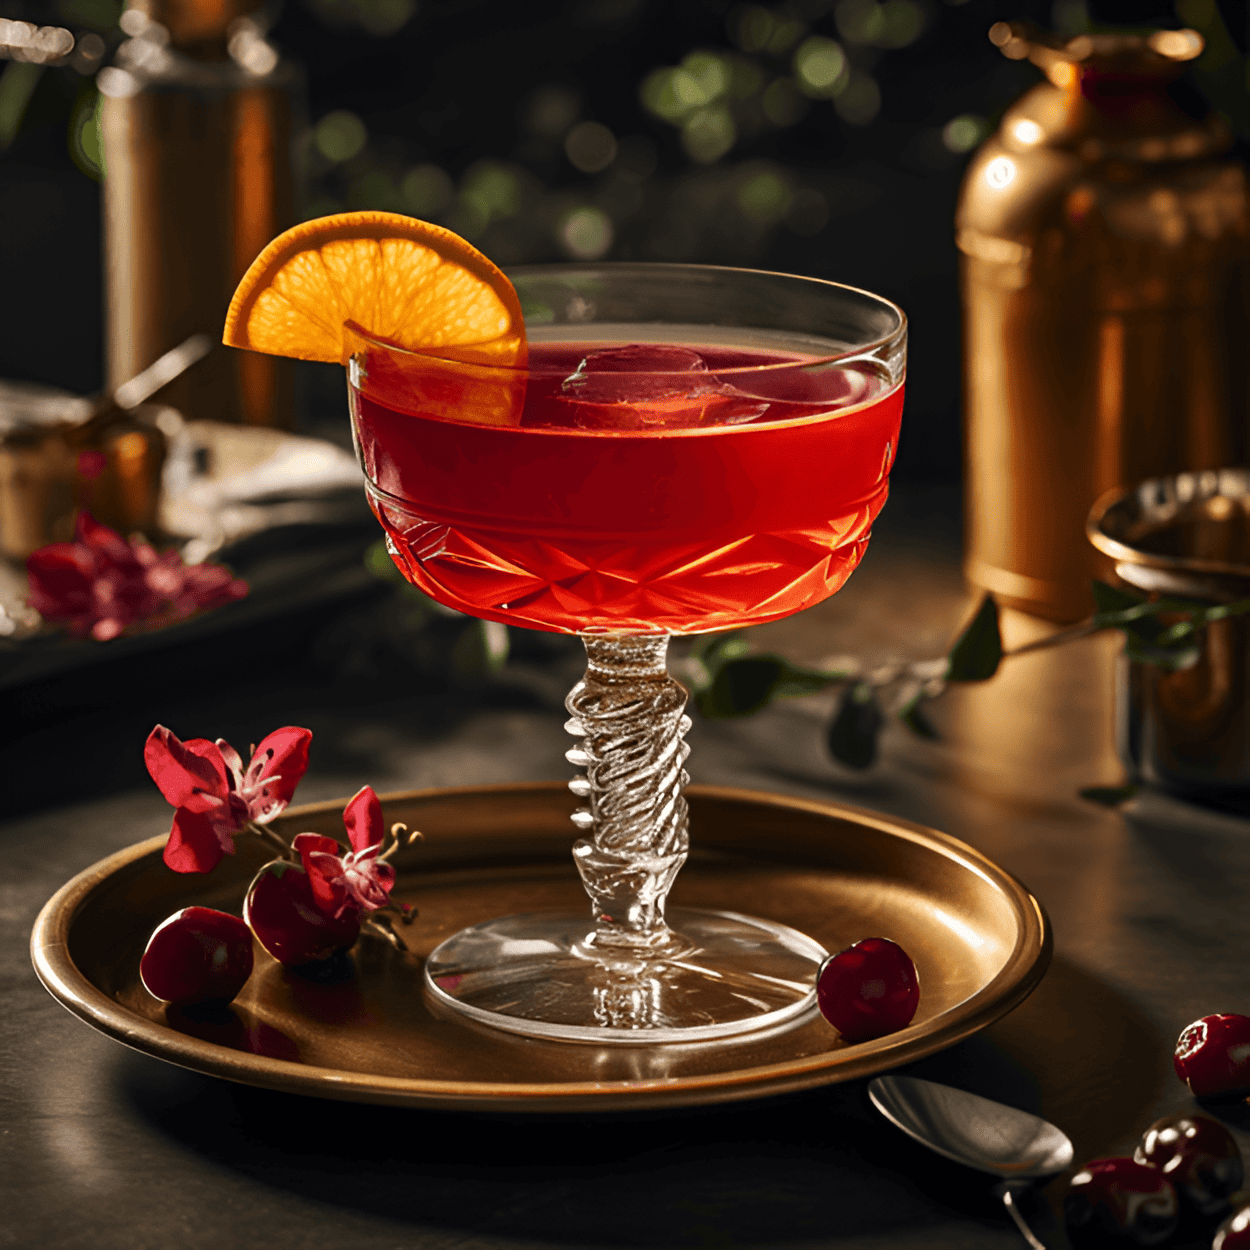 Sloe Screw Cocktail Recipe - The Sloe Screw cocktail is fruity, sweet, and slightly tart. The sloe gin adds a rich berry flavor, while the orange juice provides a citrusy brightness. The vodka gives it a smooth, clean finish.